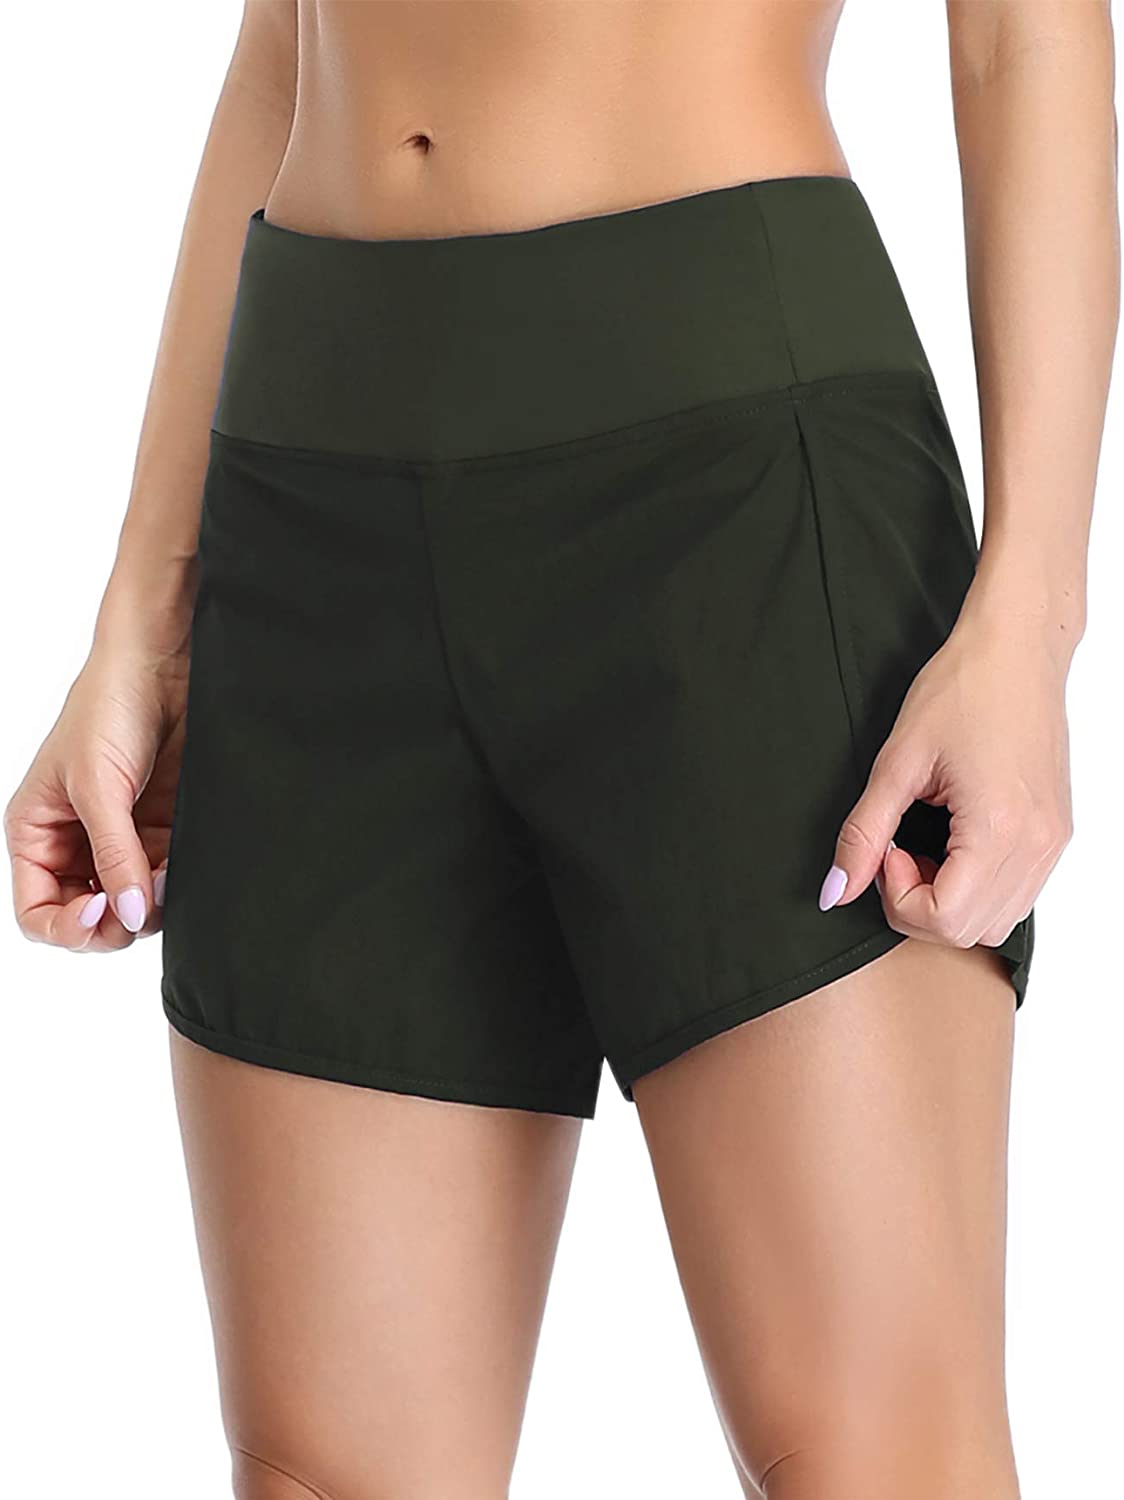 63 10 Minute Olive green workout shorts for Beginner